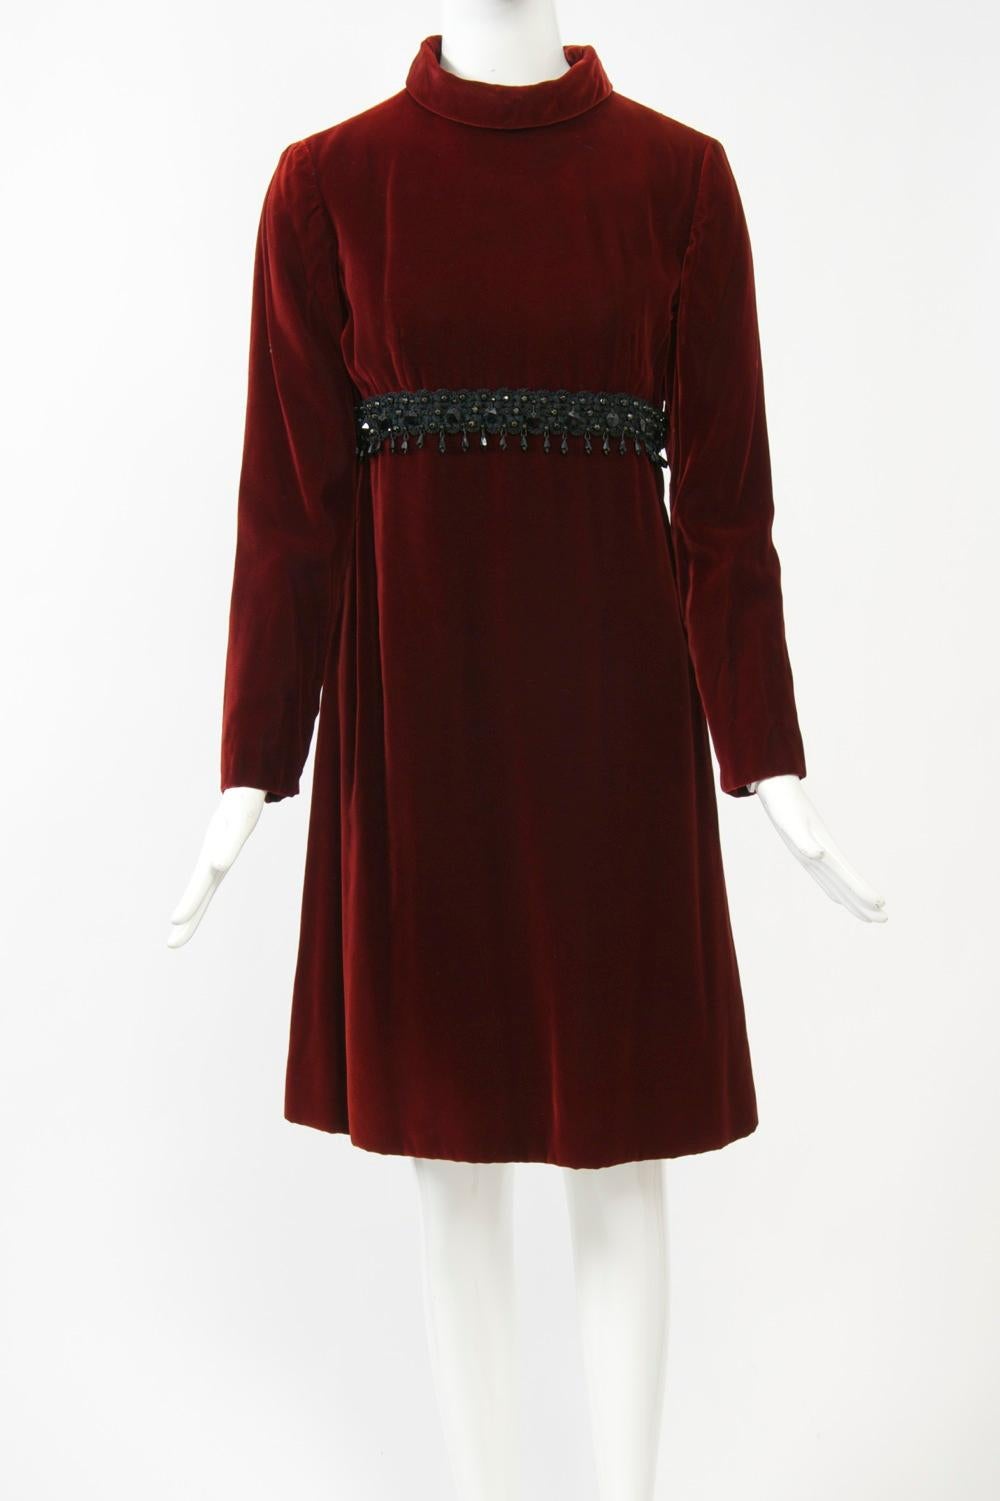 Rich burgundy velvet 1960s dress by Kiki Hart featuring an empire bustline trimmed with a band of black soutache and jet beads. A rolled turtleneck, narrow, set-in sleeves, and an A-line skirt complete the look. Fully lined. Back zipper. Approximate